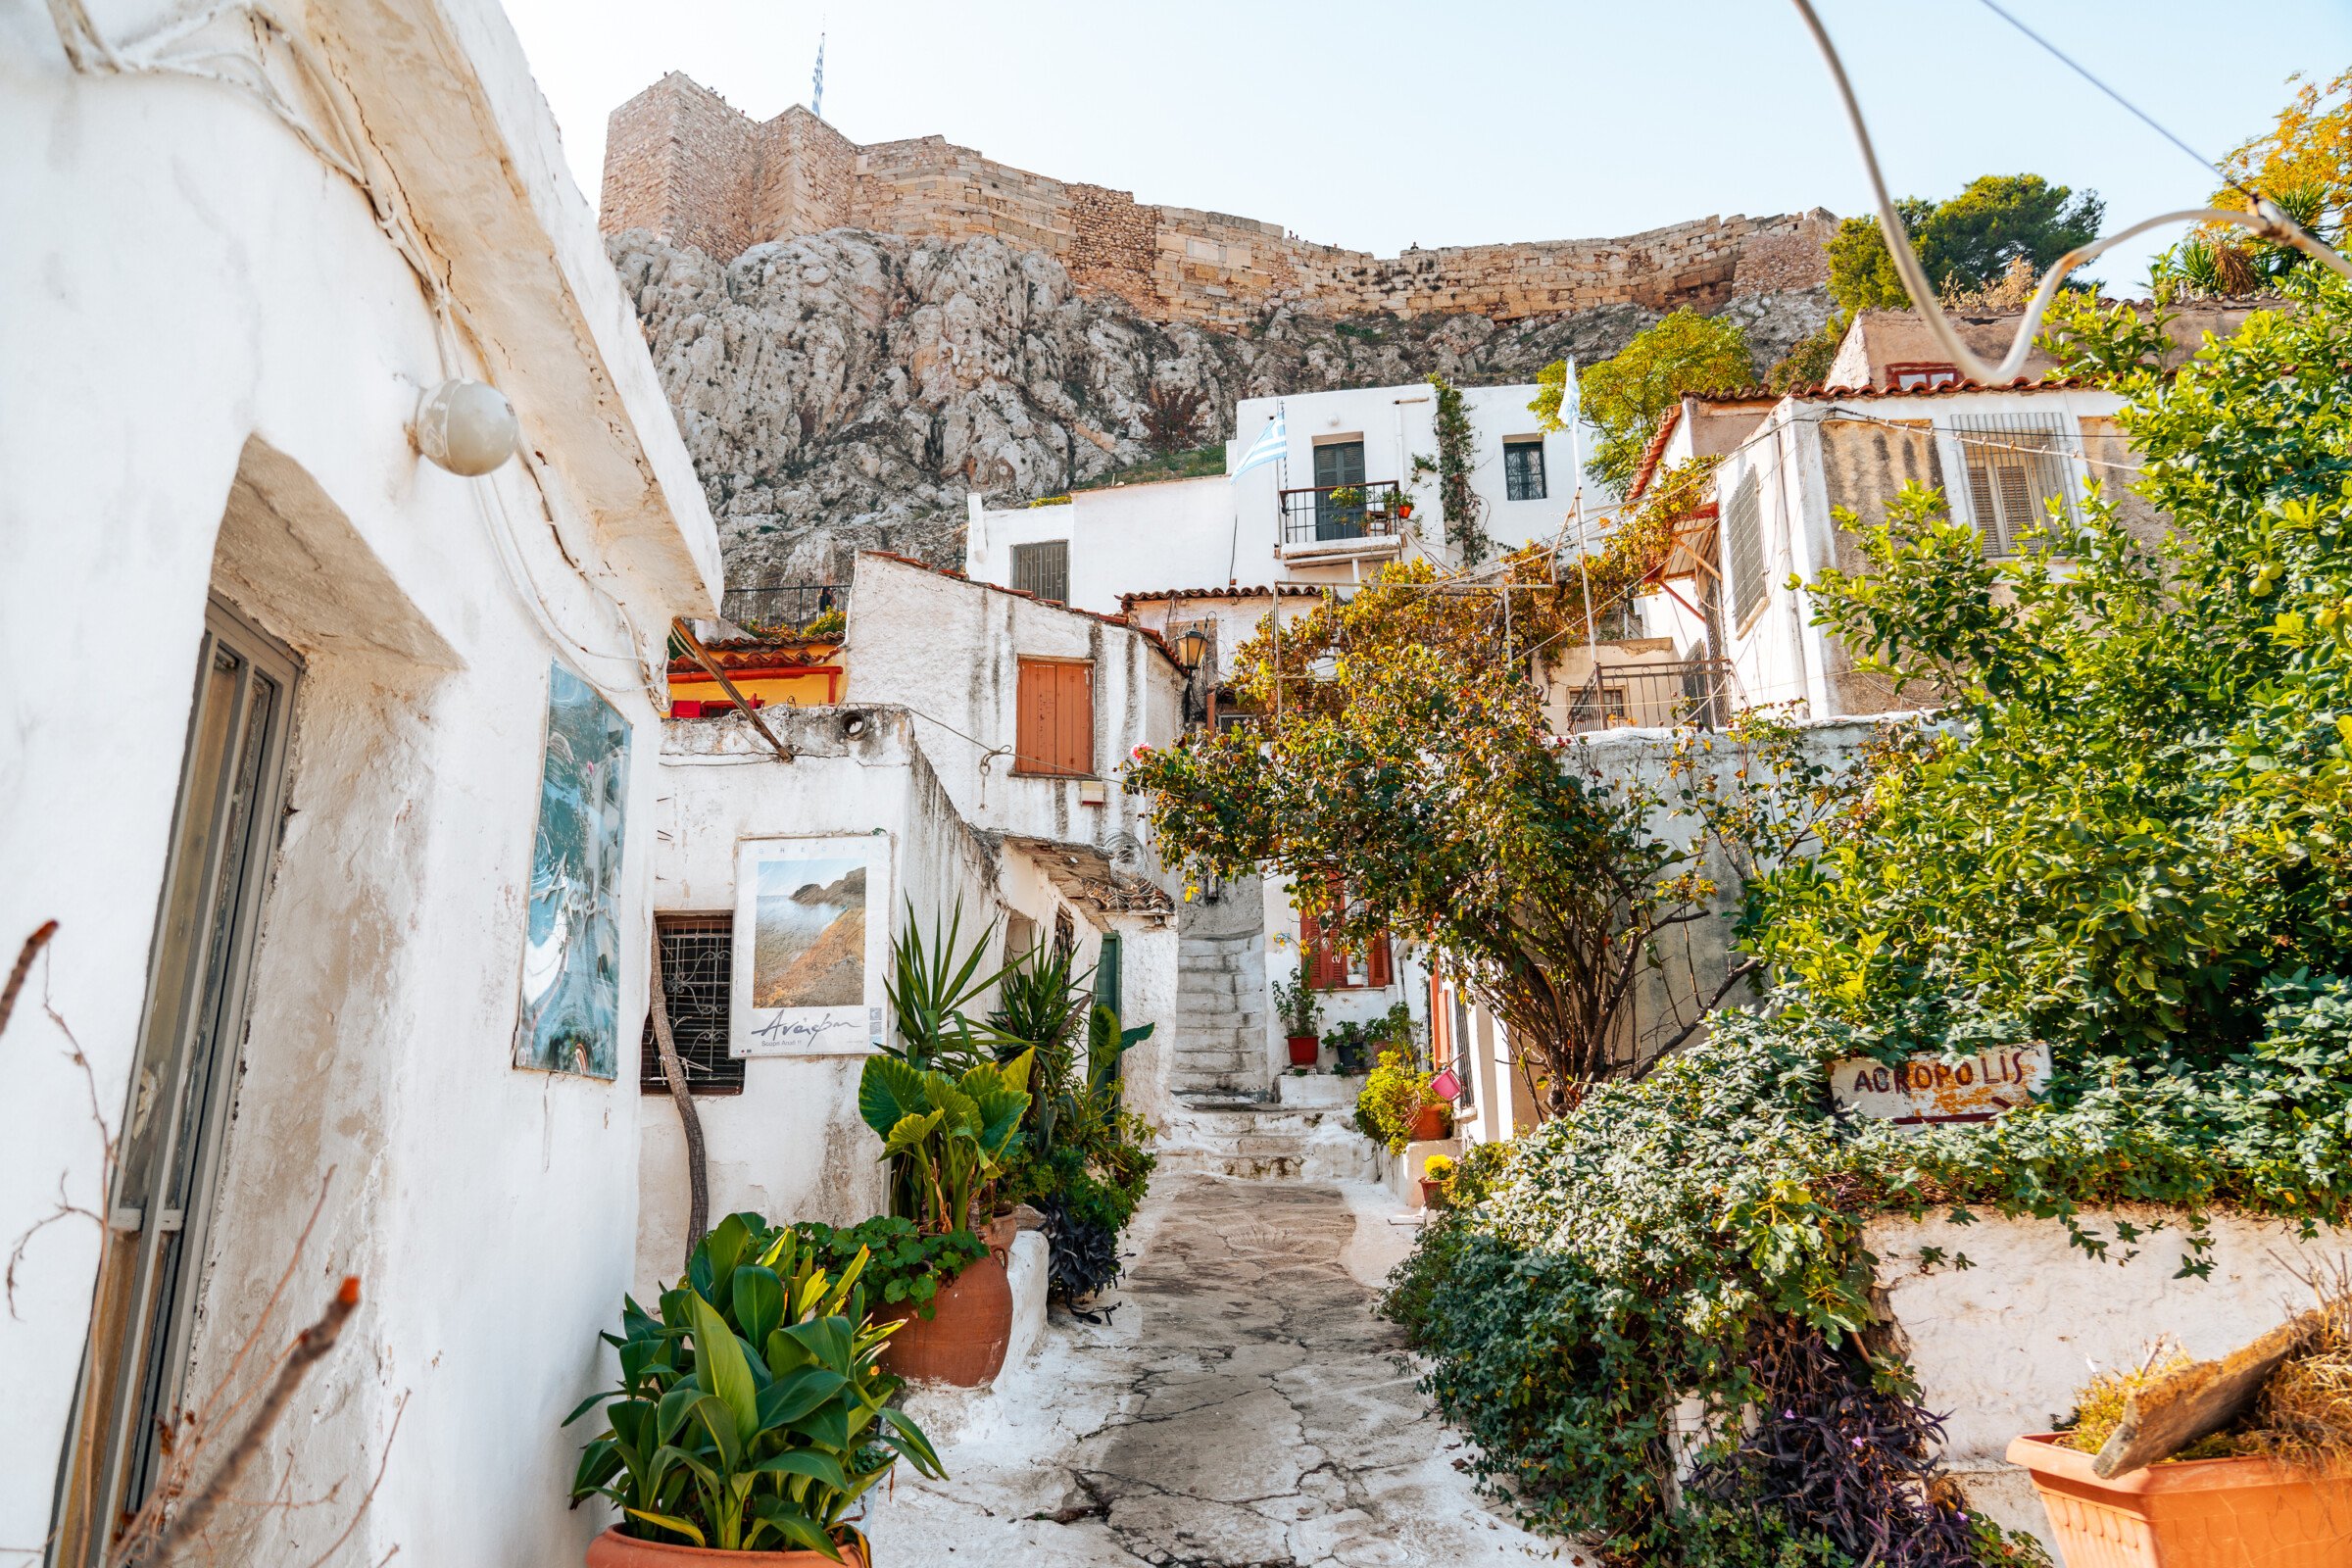 This image shows a whitewashed alley in Plaka, lined with whitewashed houses. This scenic neighbourhood is right under the sacred rock of the Acropolis. 